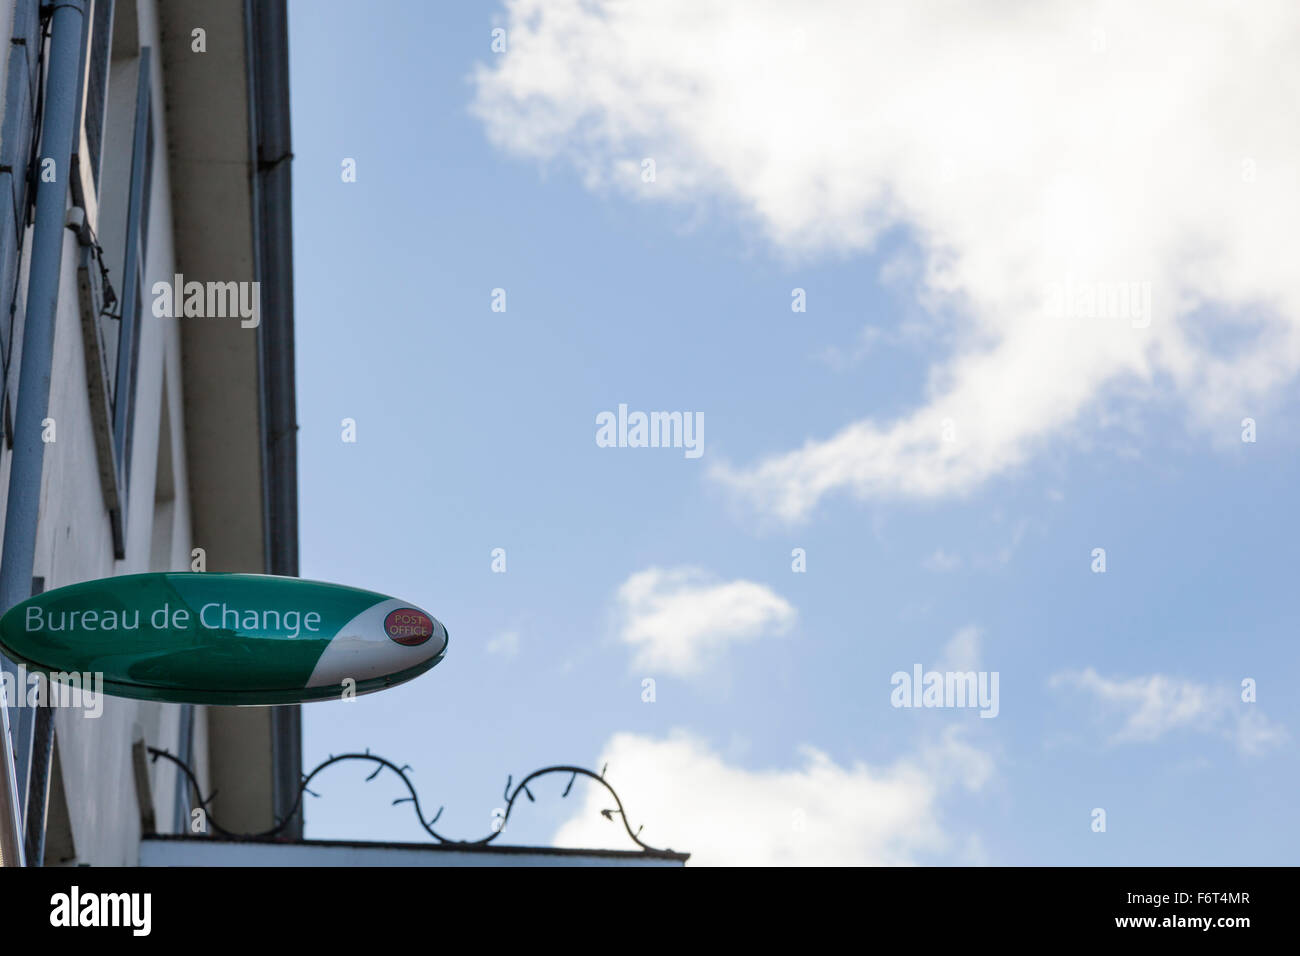 A green and white 'Bureau de Change' sign above a  Post Office. Stock Photo